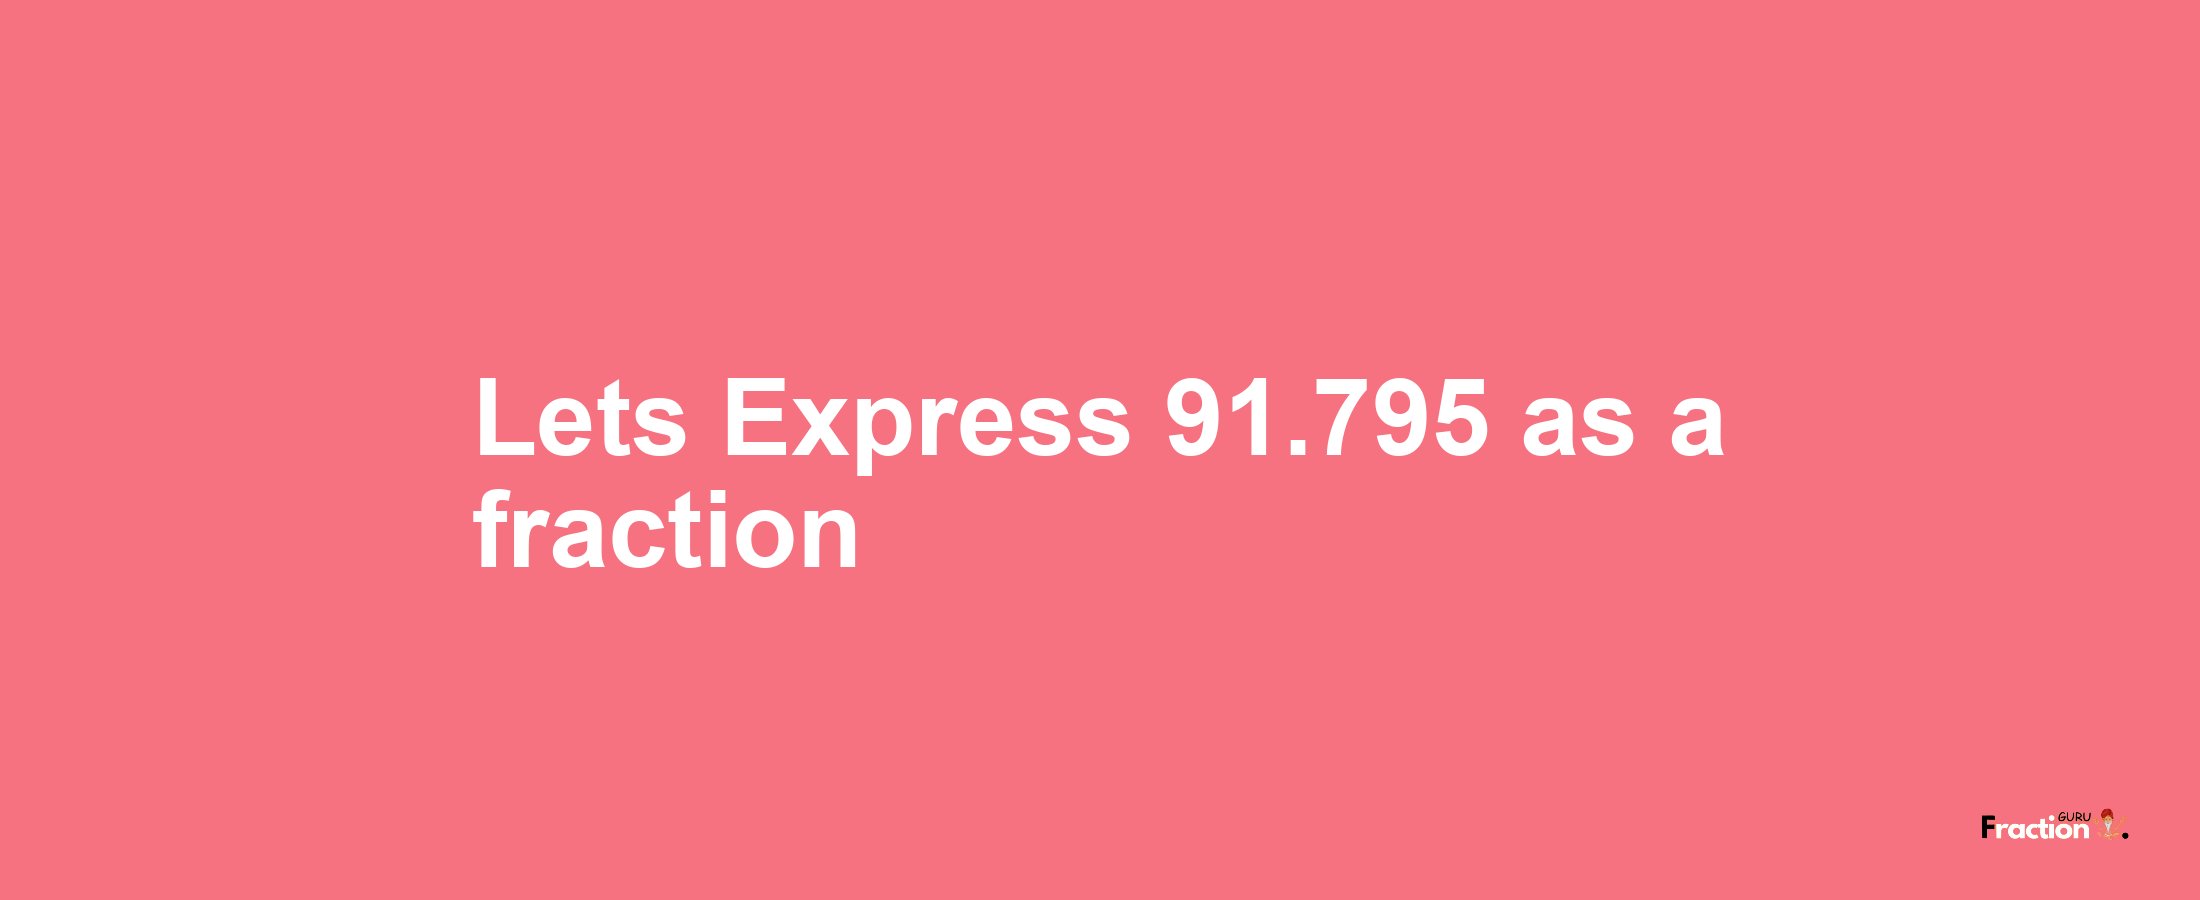 Lets Express 91.795 as afraction